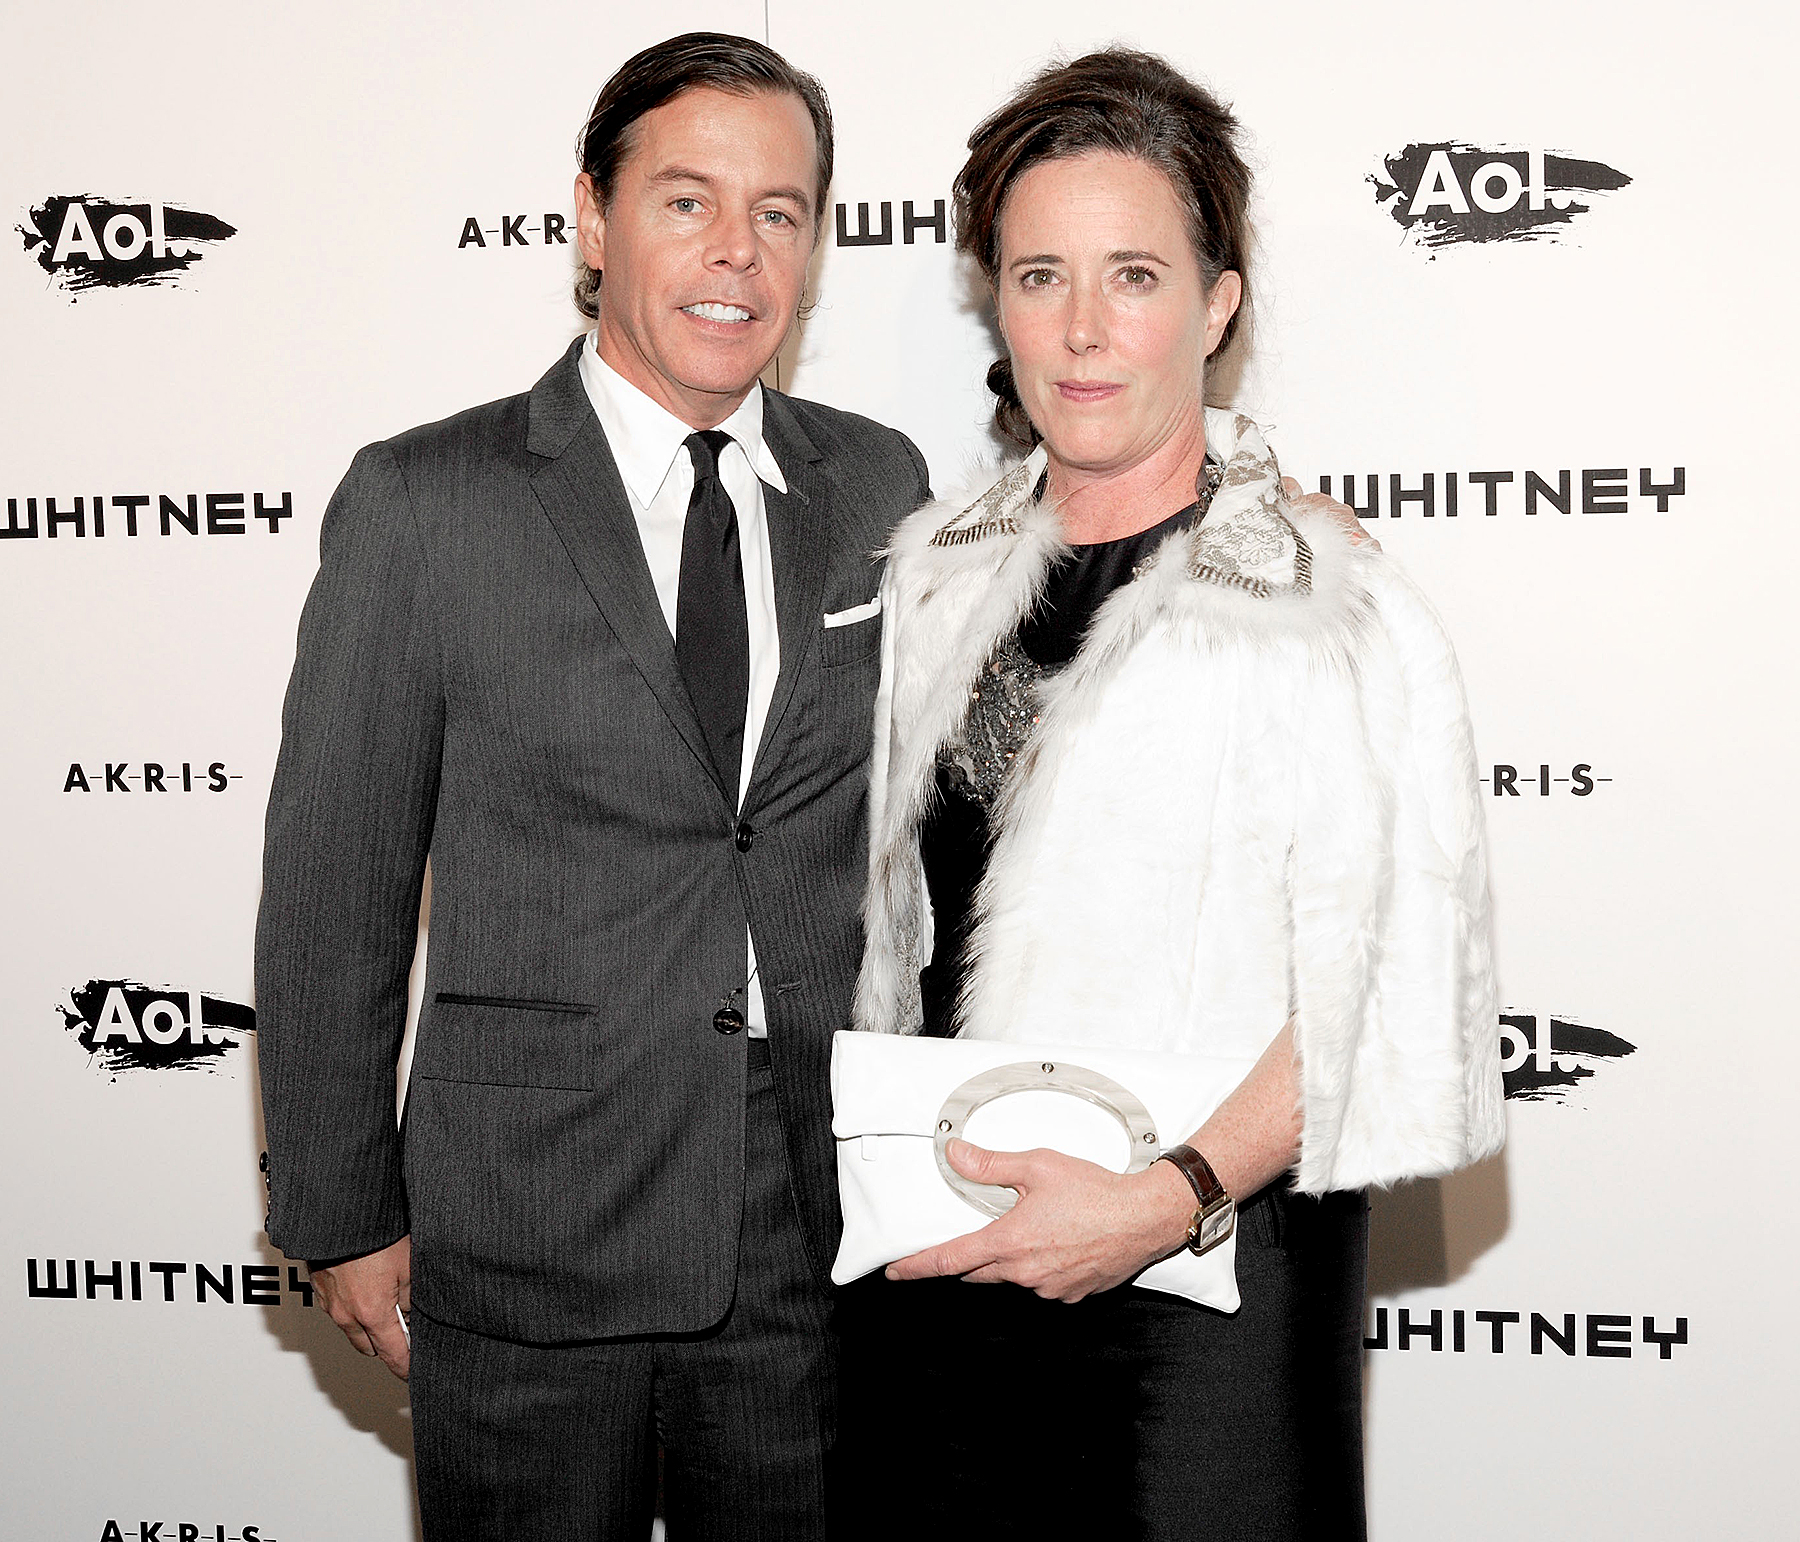 Kate Spade's husband: Apparent suicide a complete shock - BBC News